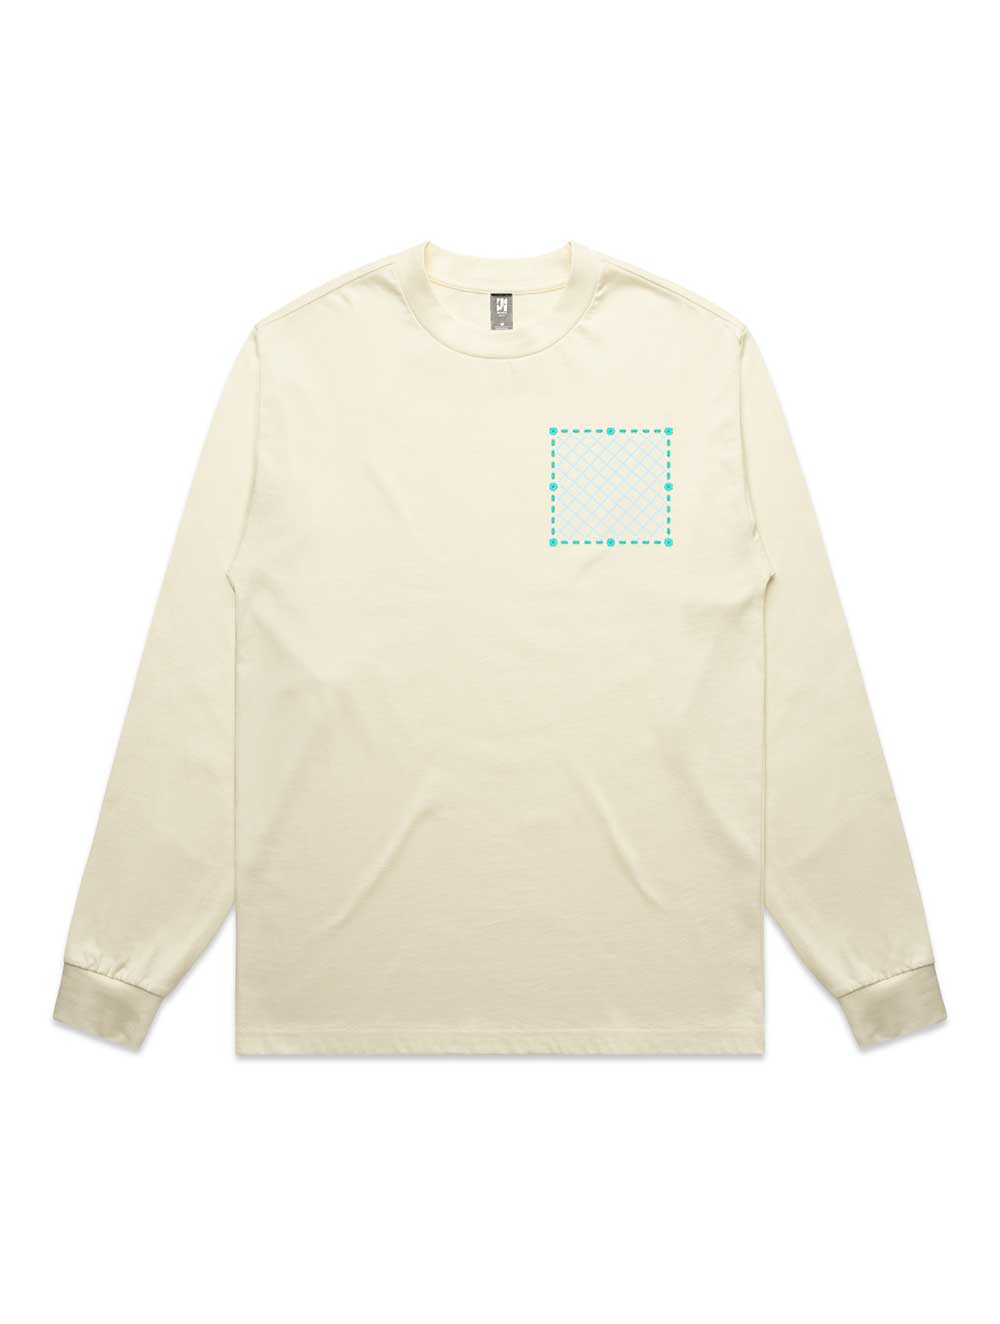 Embroidered AS Colour Heavy Long Sleeve Tee